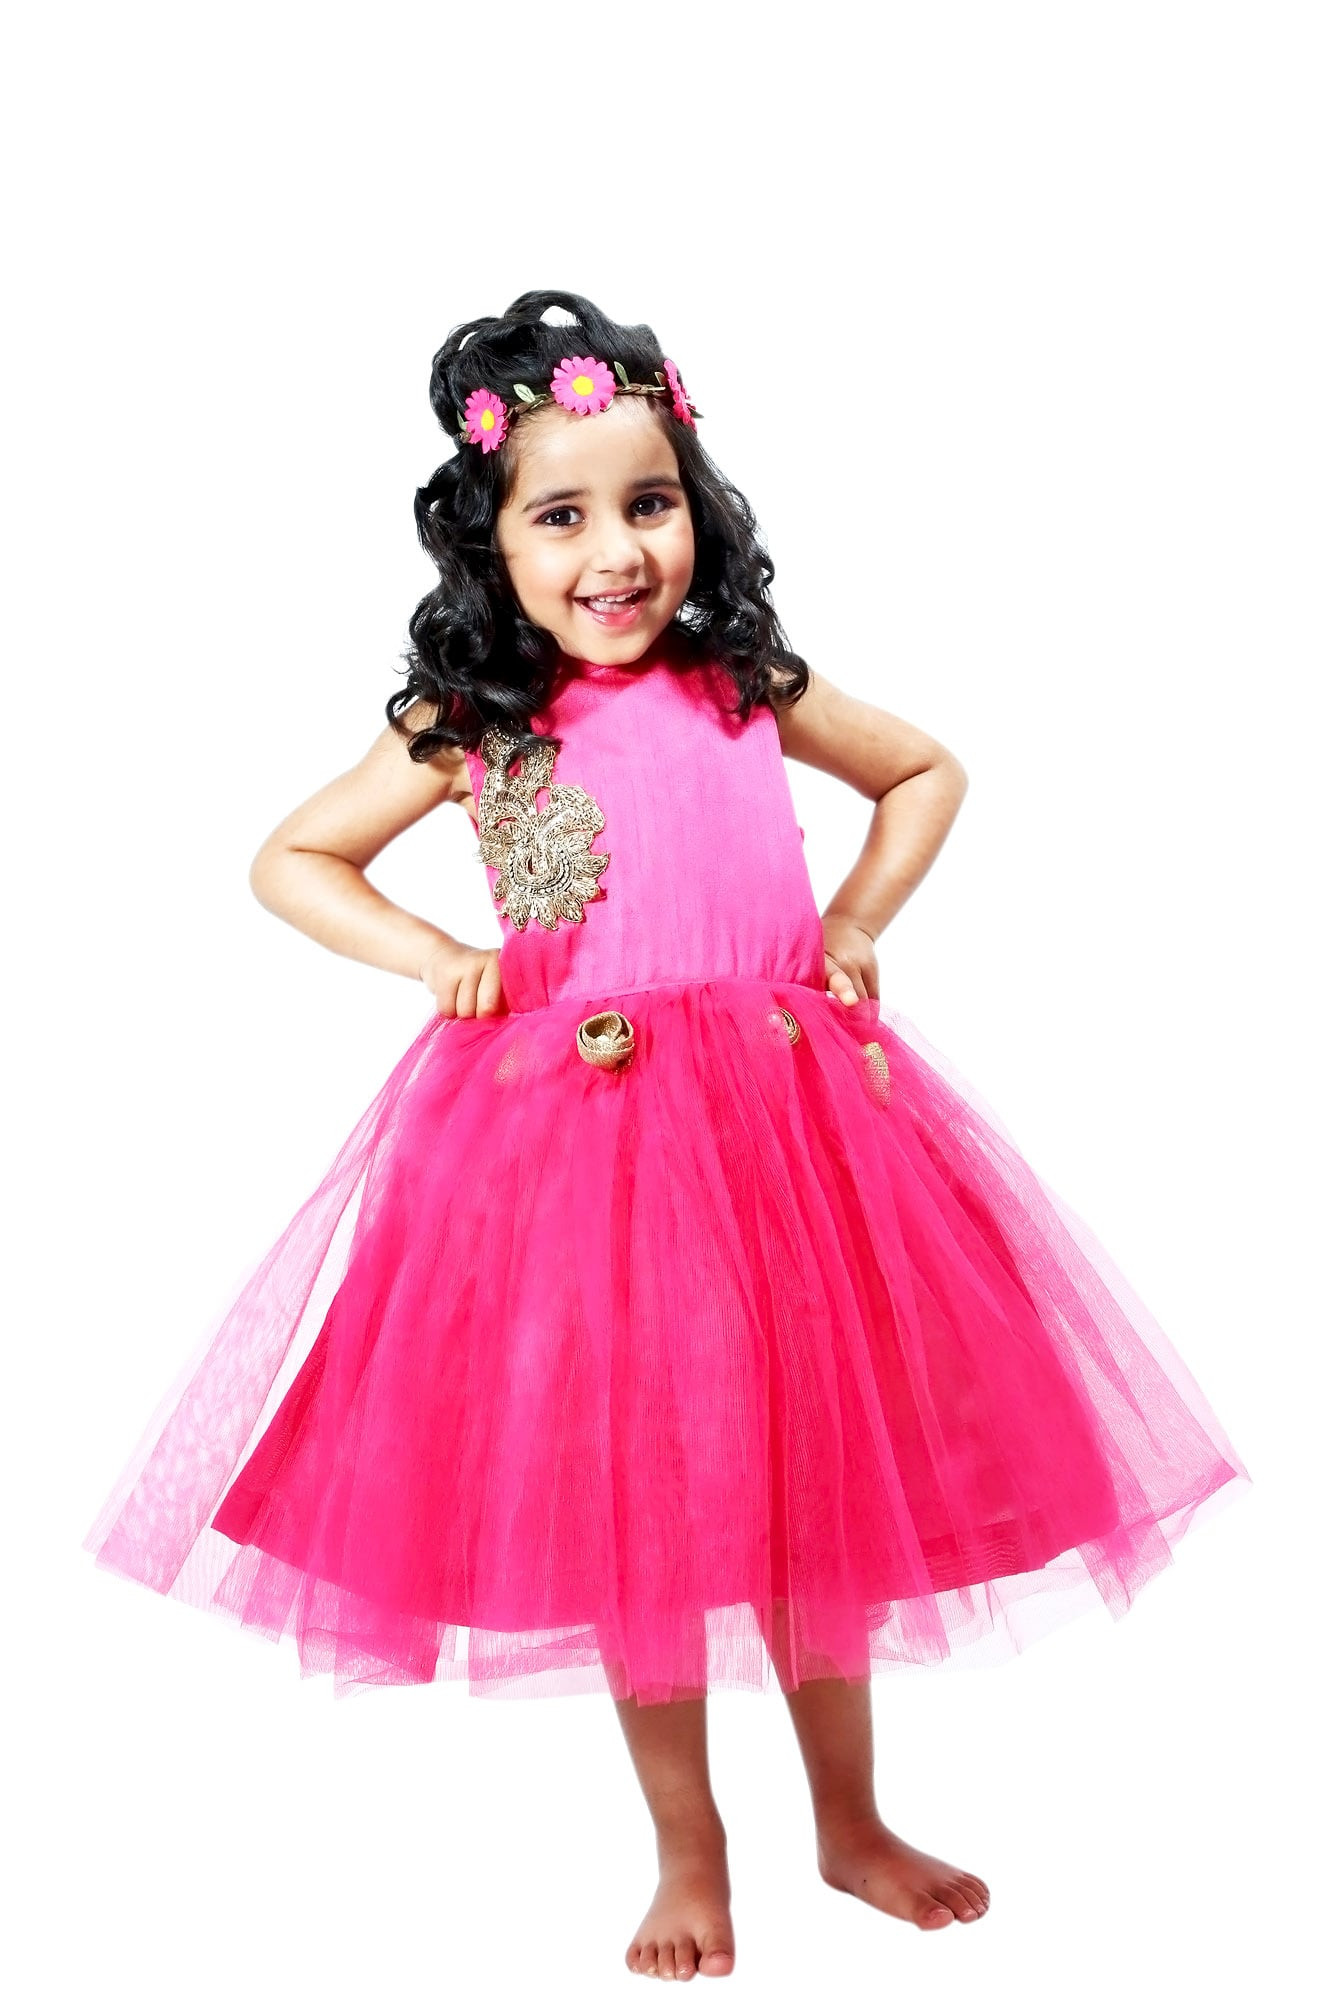 Party Wear Frocks For Baby Girl
 Stylish and Fancy Party Wear Frocks For Babies